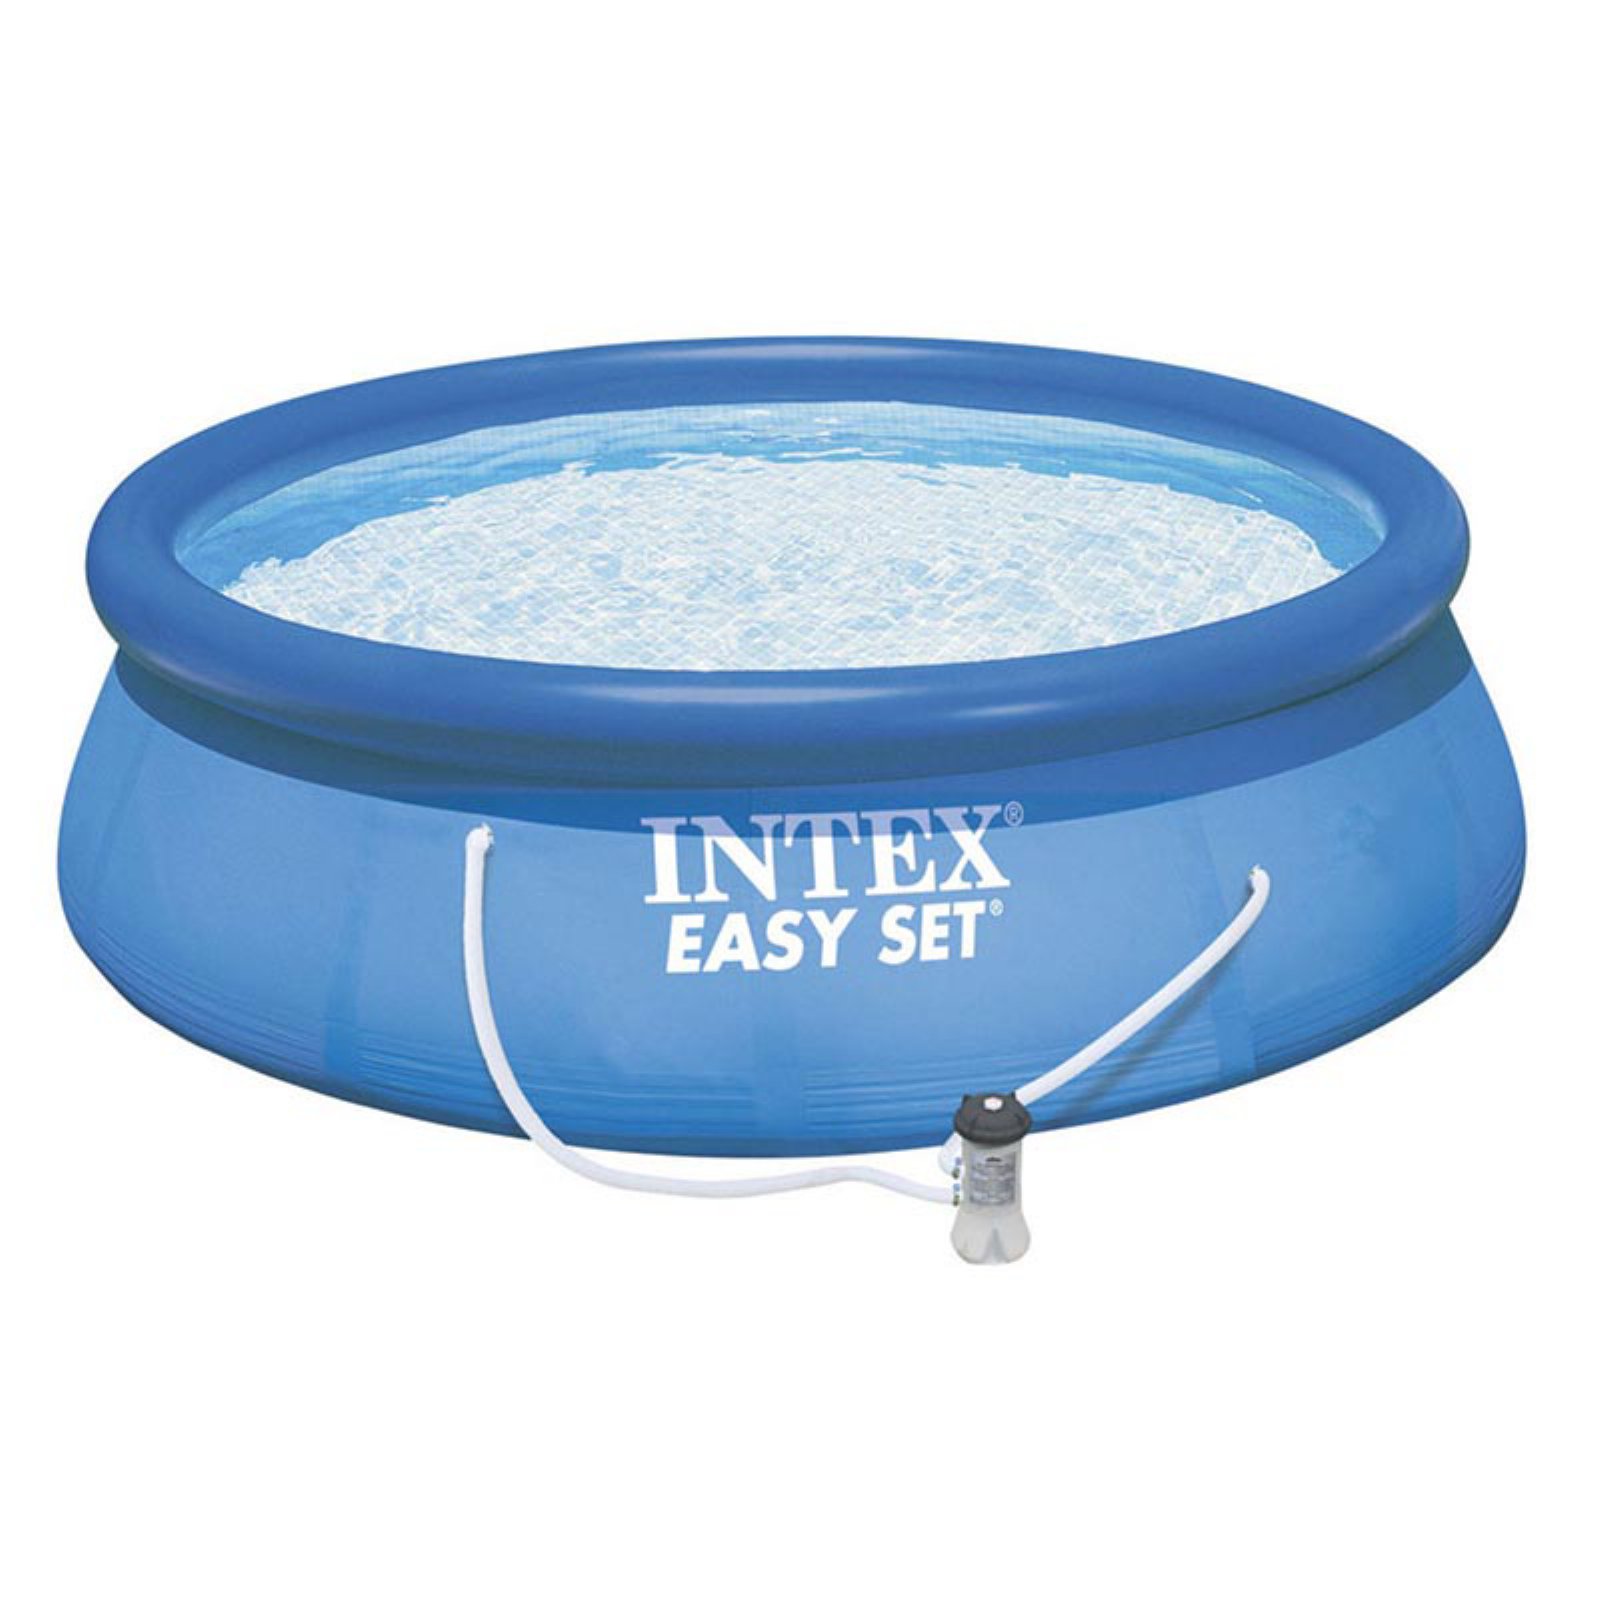 Intex 15′ x 33” Easy Set Above Ground Swimming Pool with Filter Pump